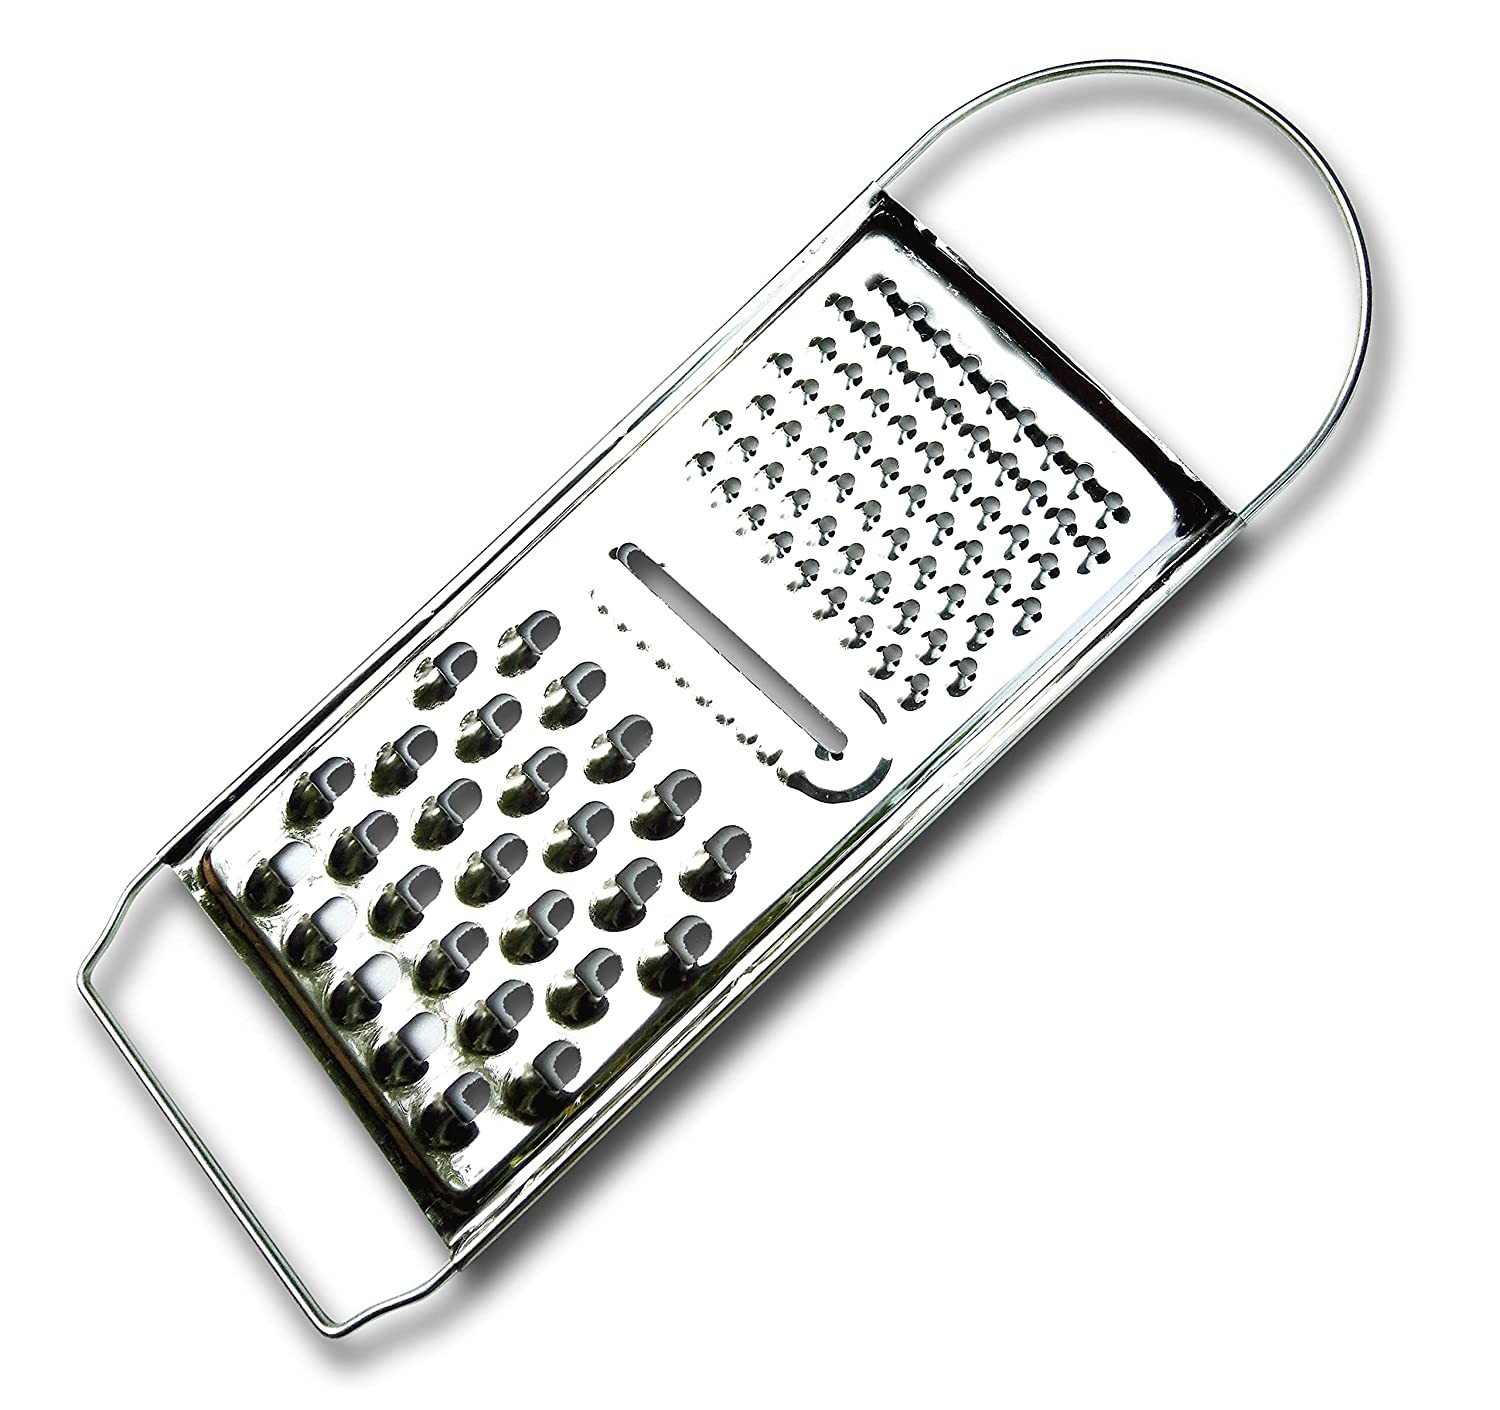 Stylish Stainless Steel 3-in-1 Cheese, Ginger, Garlic, Nutmeg & Chocolate Grater